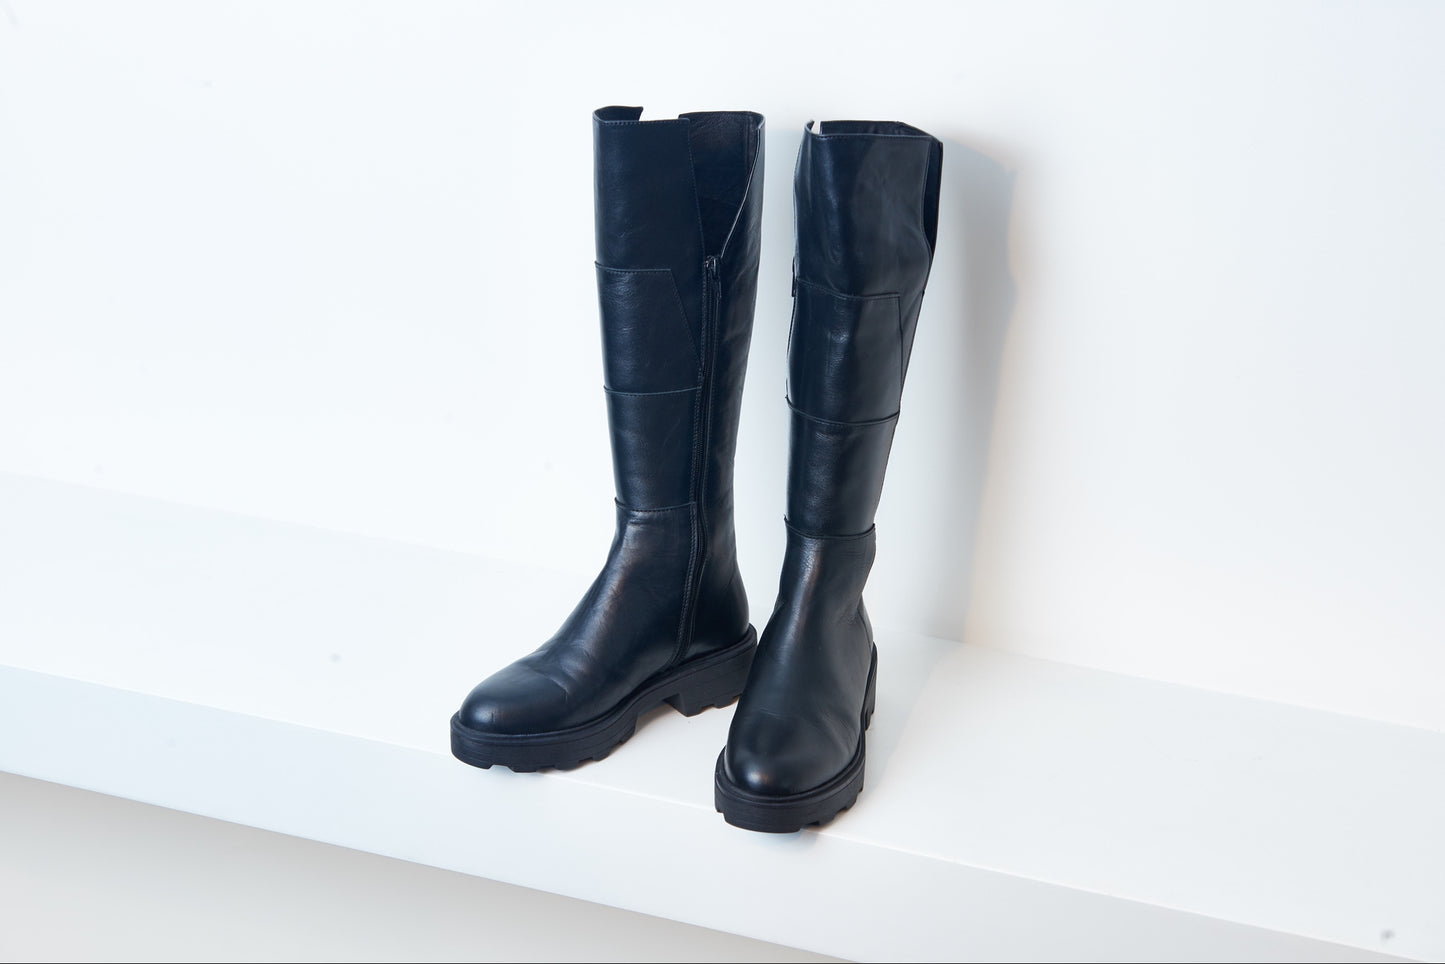 Valencia Black Leather Tall Boot